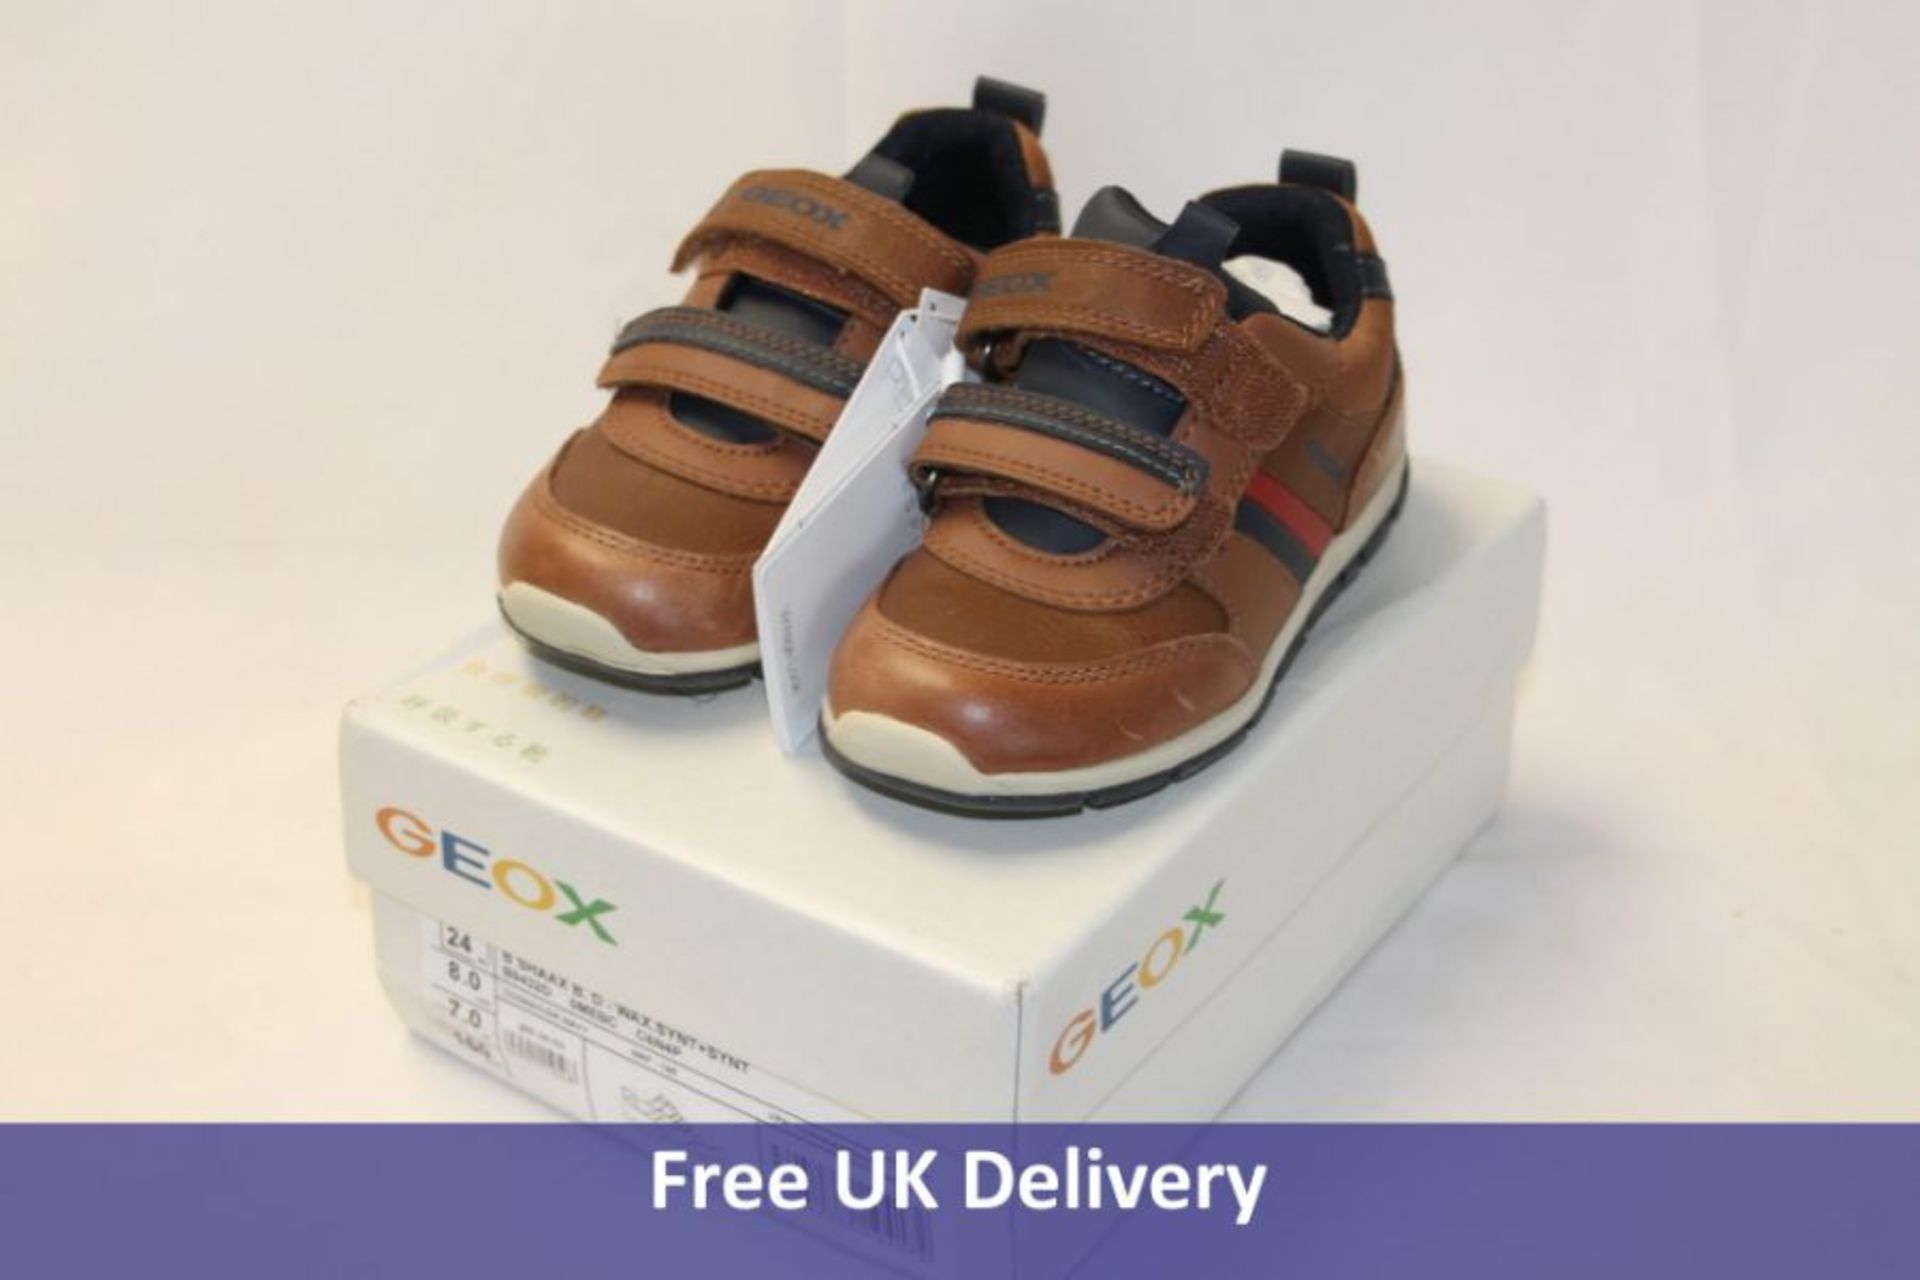 Geox B Shaax B. D - Wax/Synthetic Kid's Trainers, Cognac/Navy, UK 7 and Geox Kids Trainers, Navy/Yel